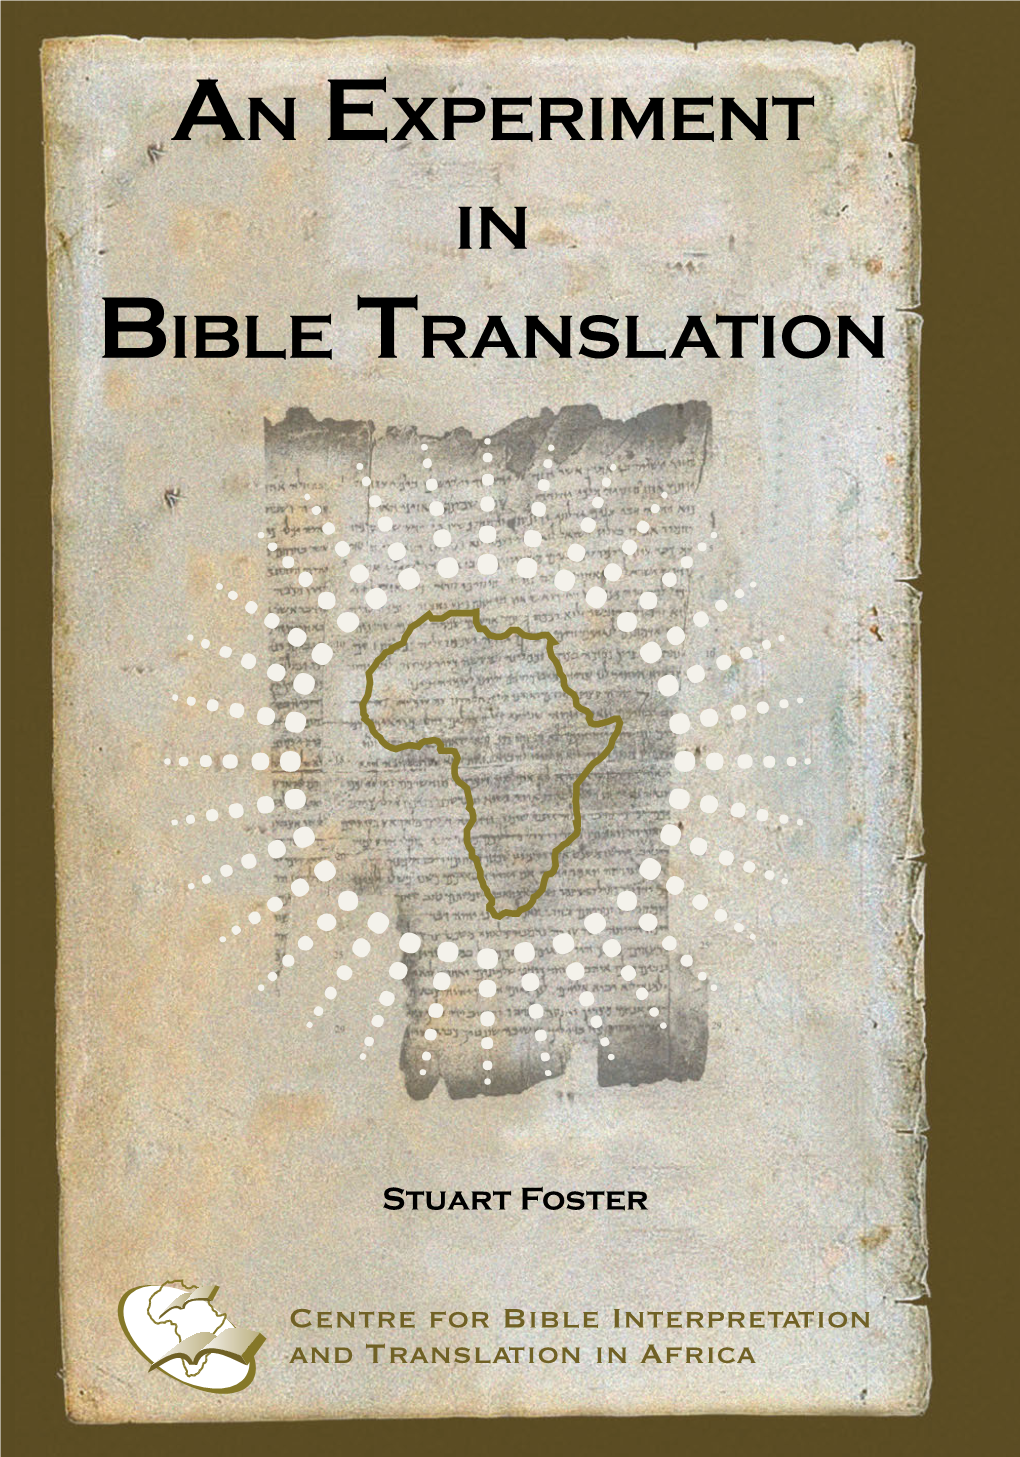 An Experiment in Bible Translation 13-02